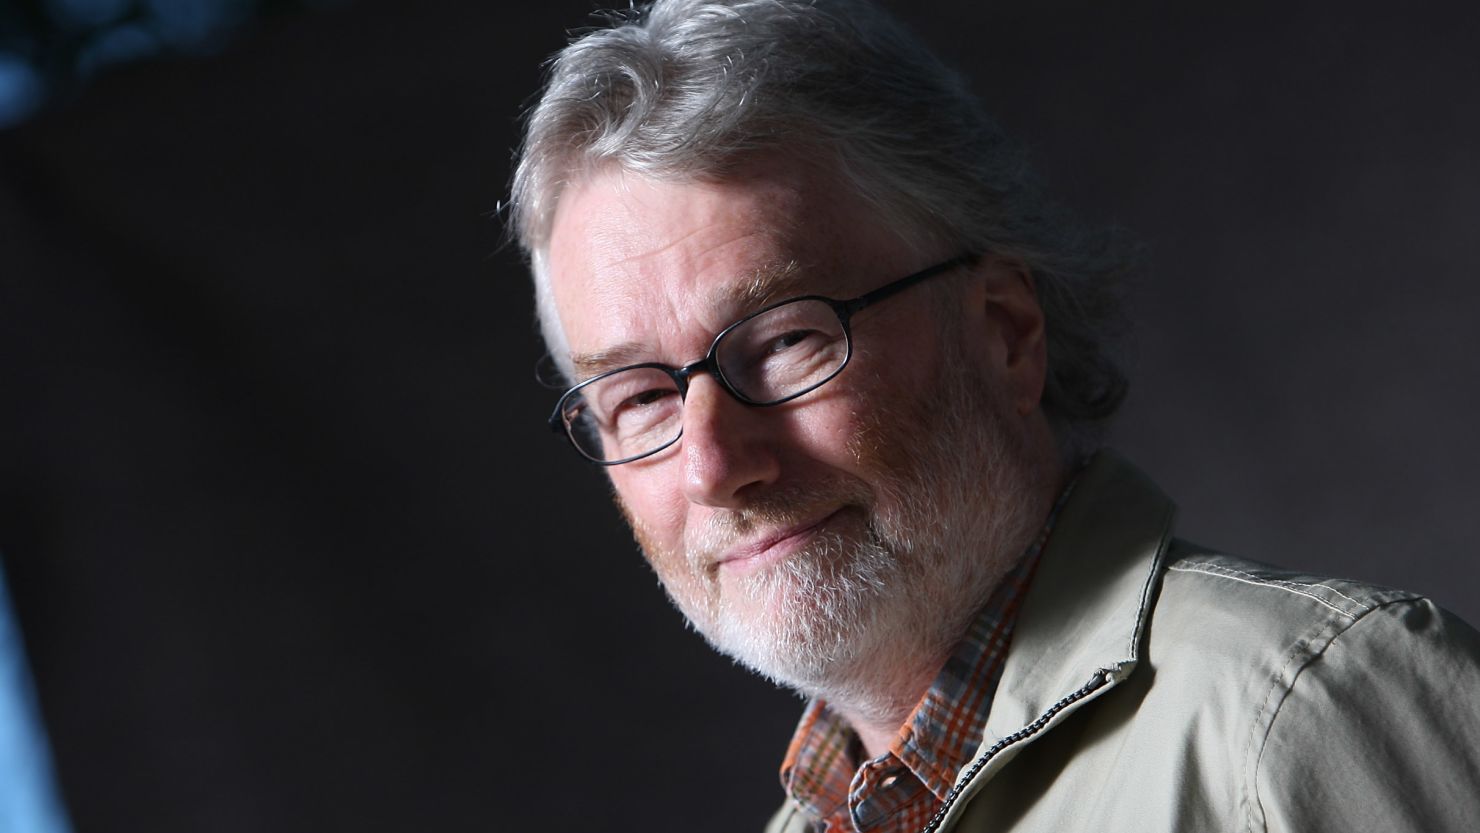 The book Iain Banks wanted to publish before he died